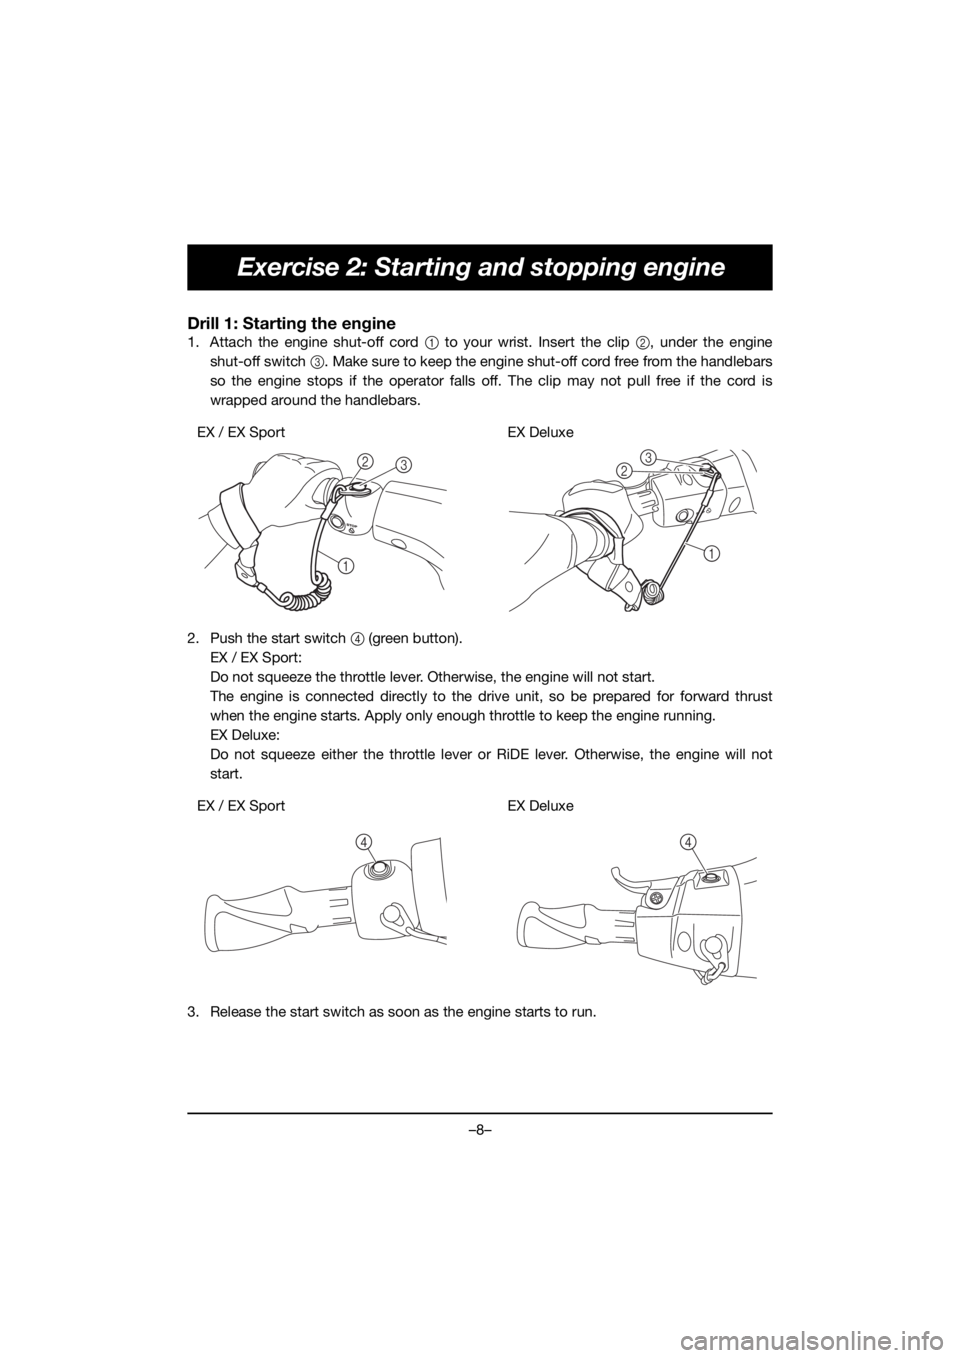 YAMAHA EX 2019  ΟΔΗΓΌΣ ΧΡΉΣΗΣ (in Greek) –8–
Exercise 2: Starting and stopping engine
Drill 1: Starting the engine
1. Attach the engine shut-off cord 1 to your wrist. Insert the clip 2, under the engine
shut-off switch 3. Make sure to ke